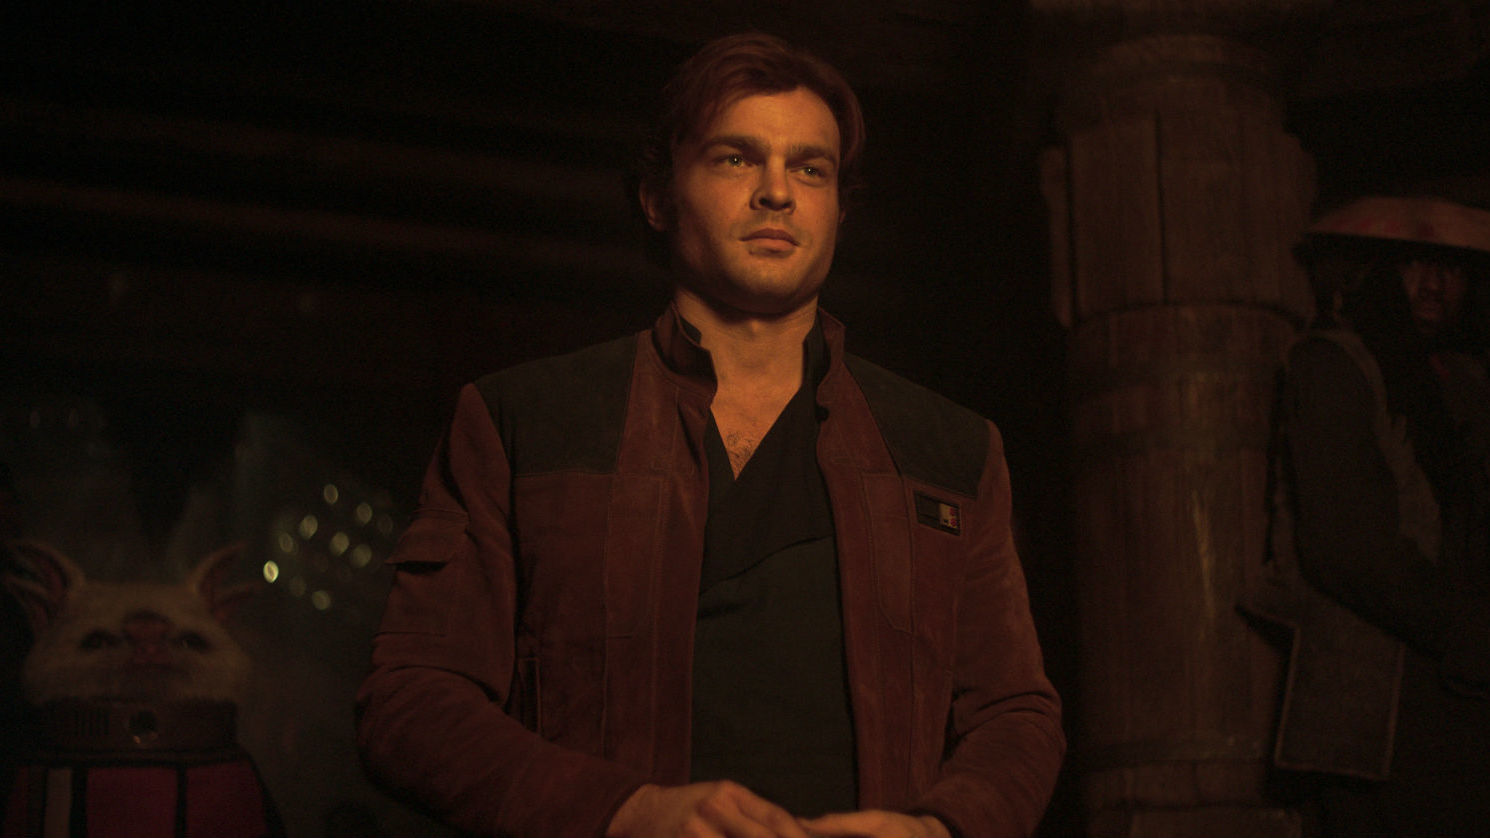 Would you be able to beat Han Solo in a game of sabacc?